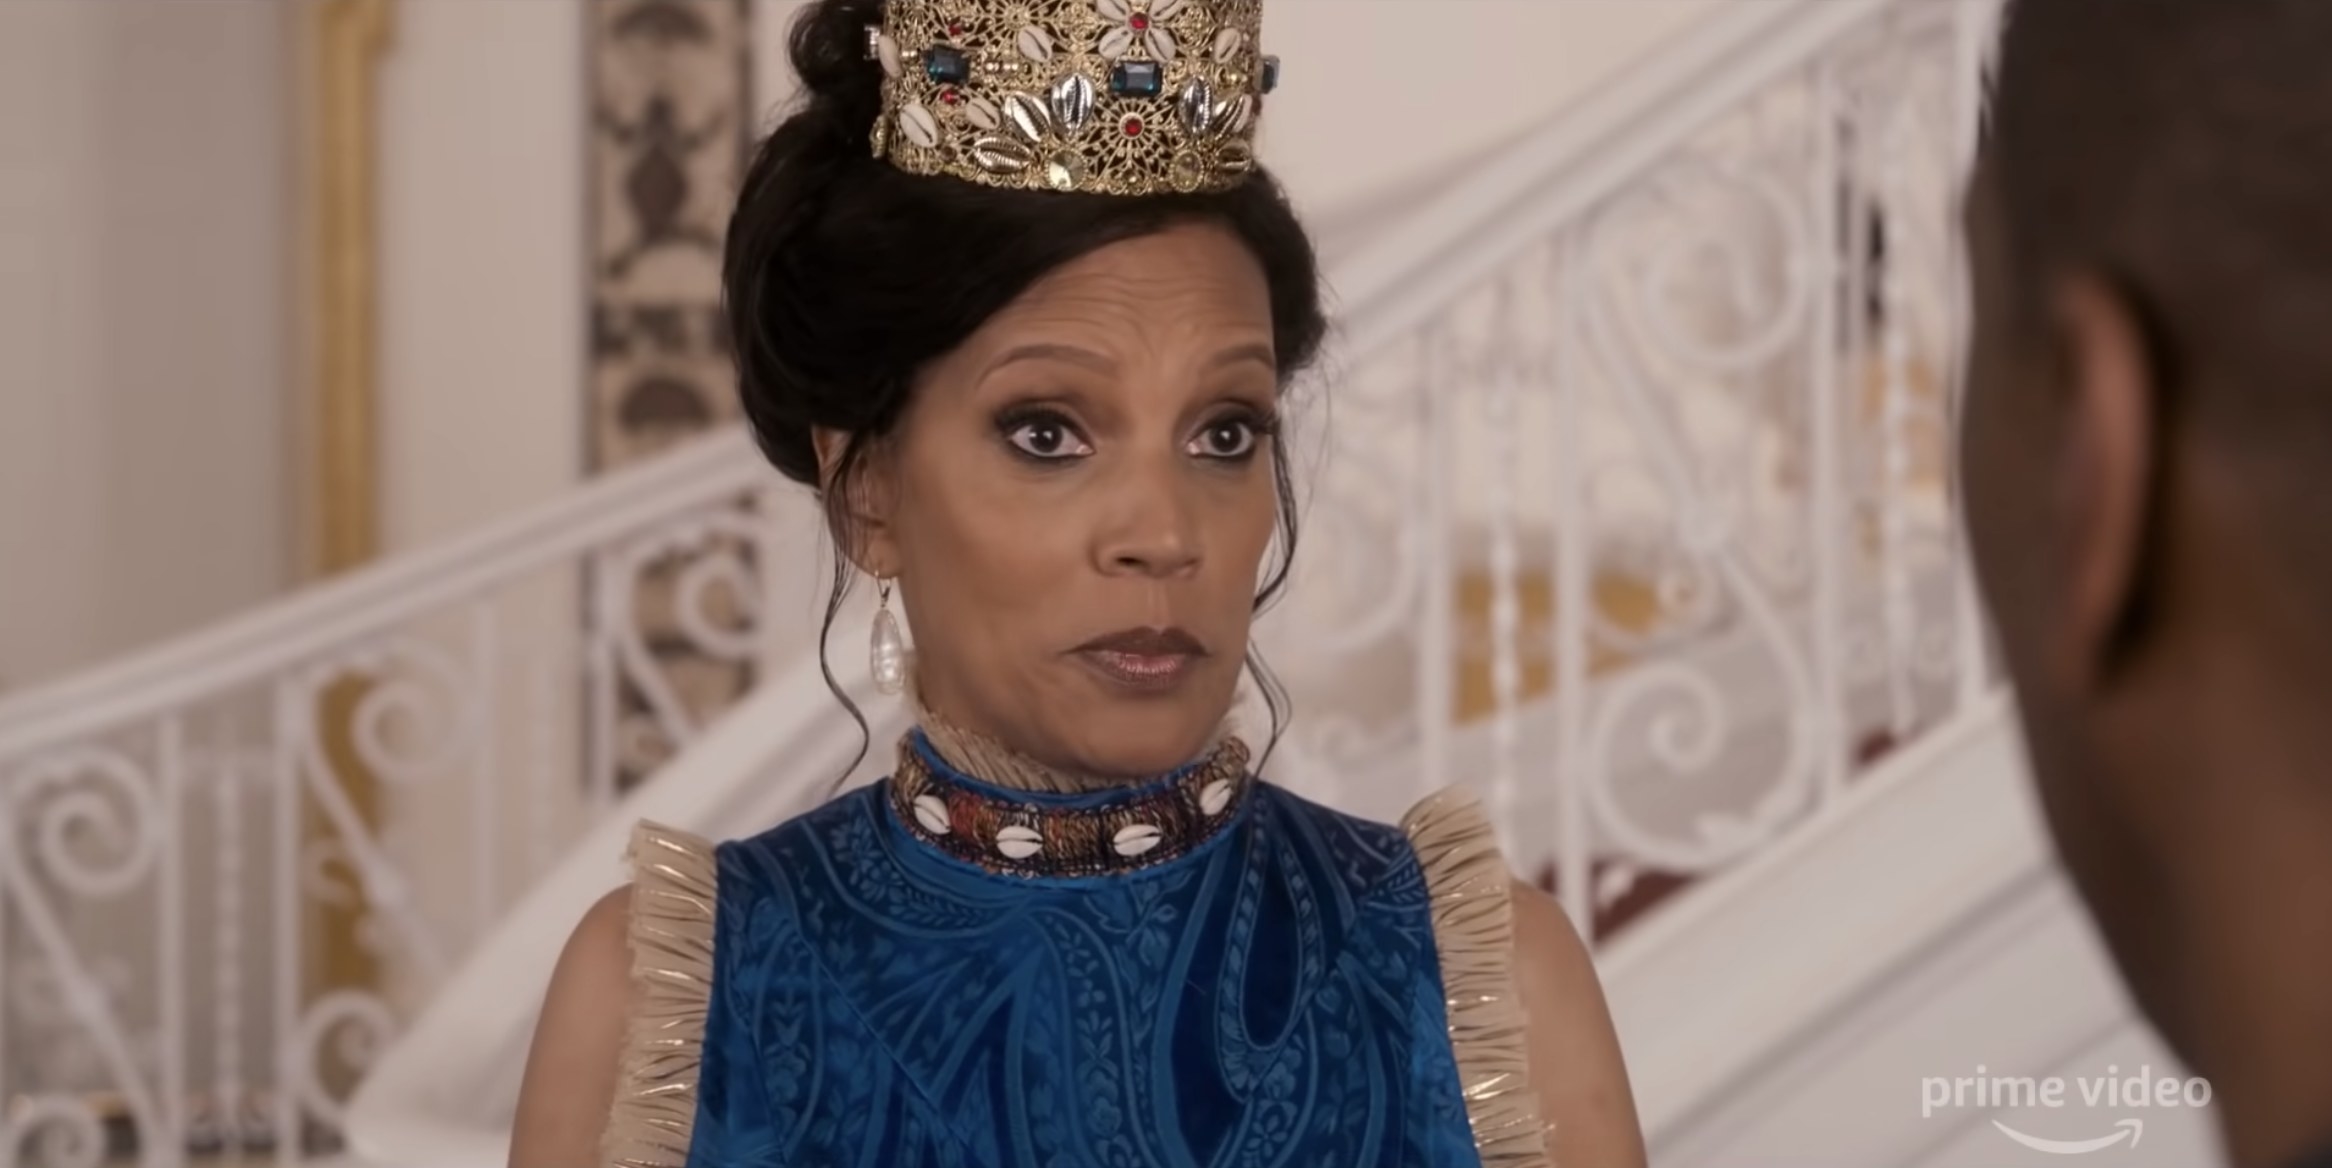 Shari Headley is reprising her role as Lisa, Akeem's now-wife and Zamu...